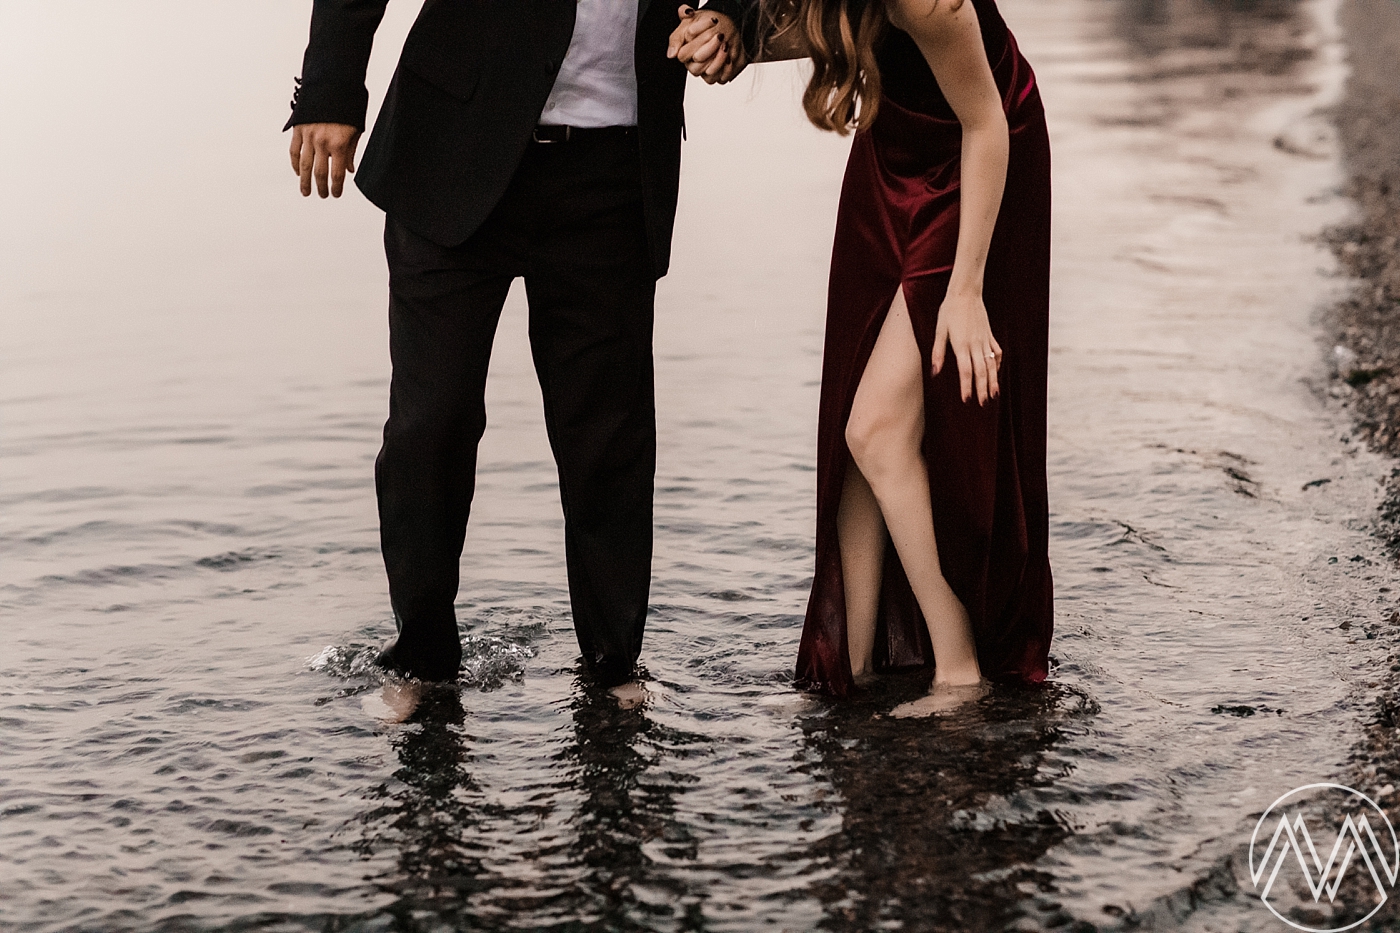 Tacoma engagement session at Point Defiance Park and Owen Beach. Photographed by Tacoma Wedding Photographer, Megan Montalvo Photography. 